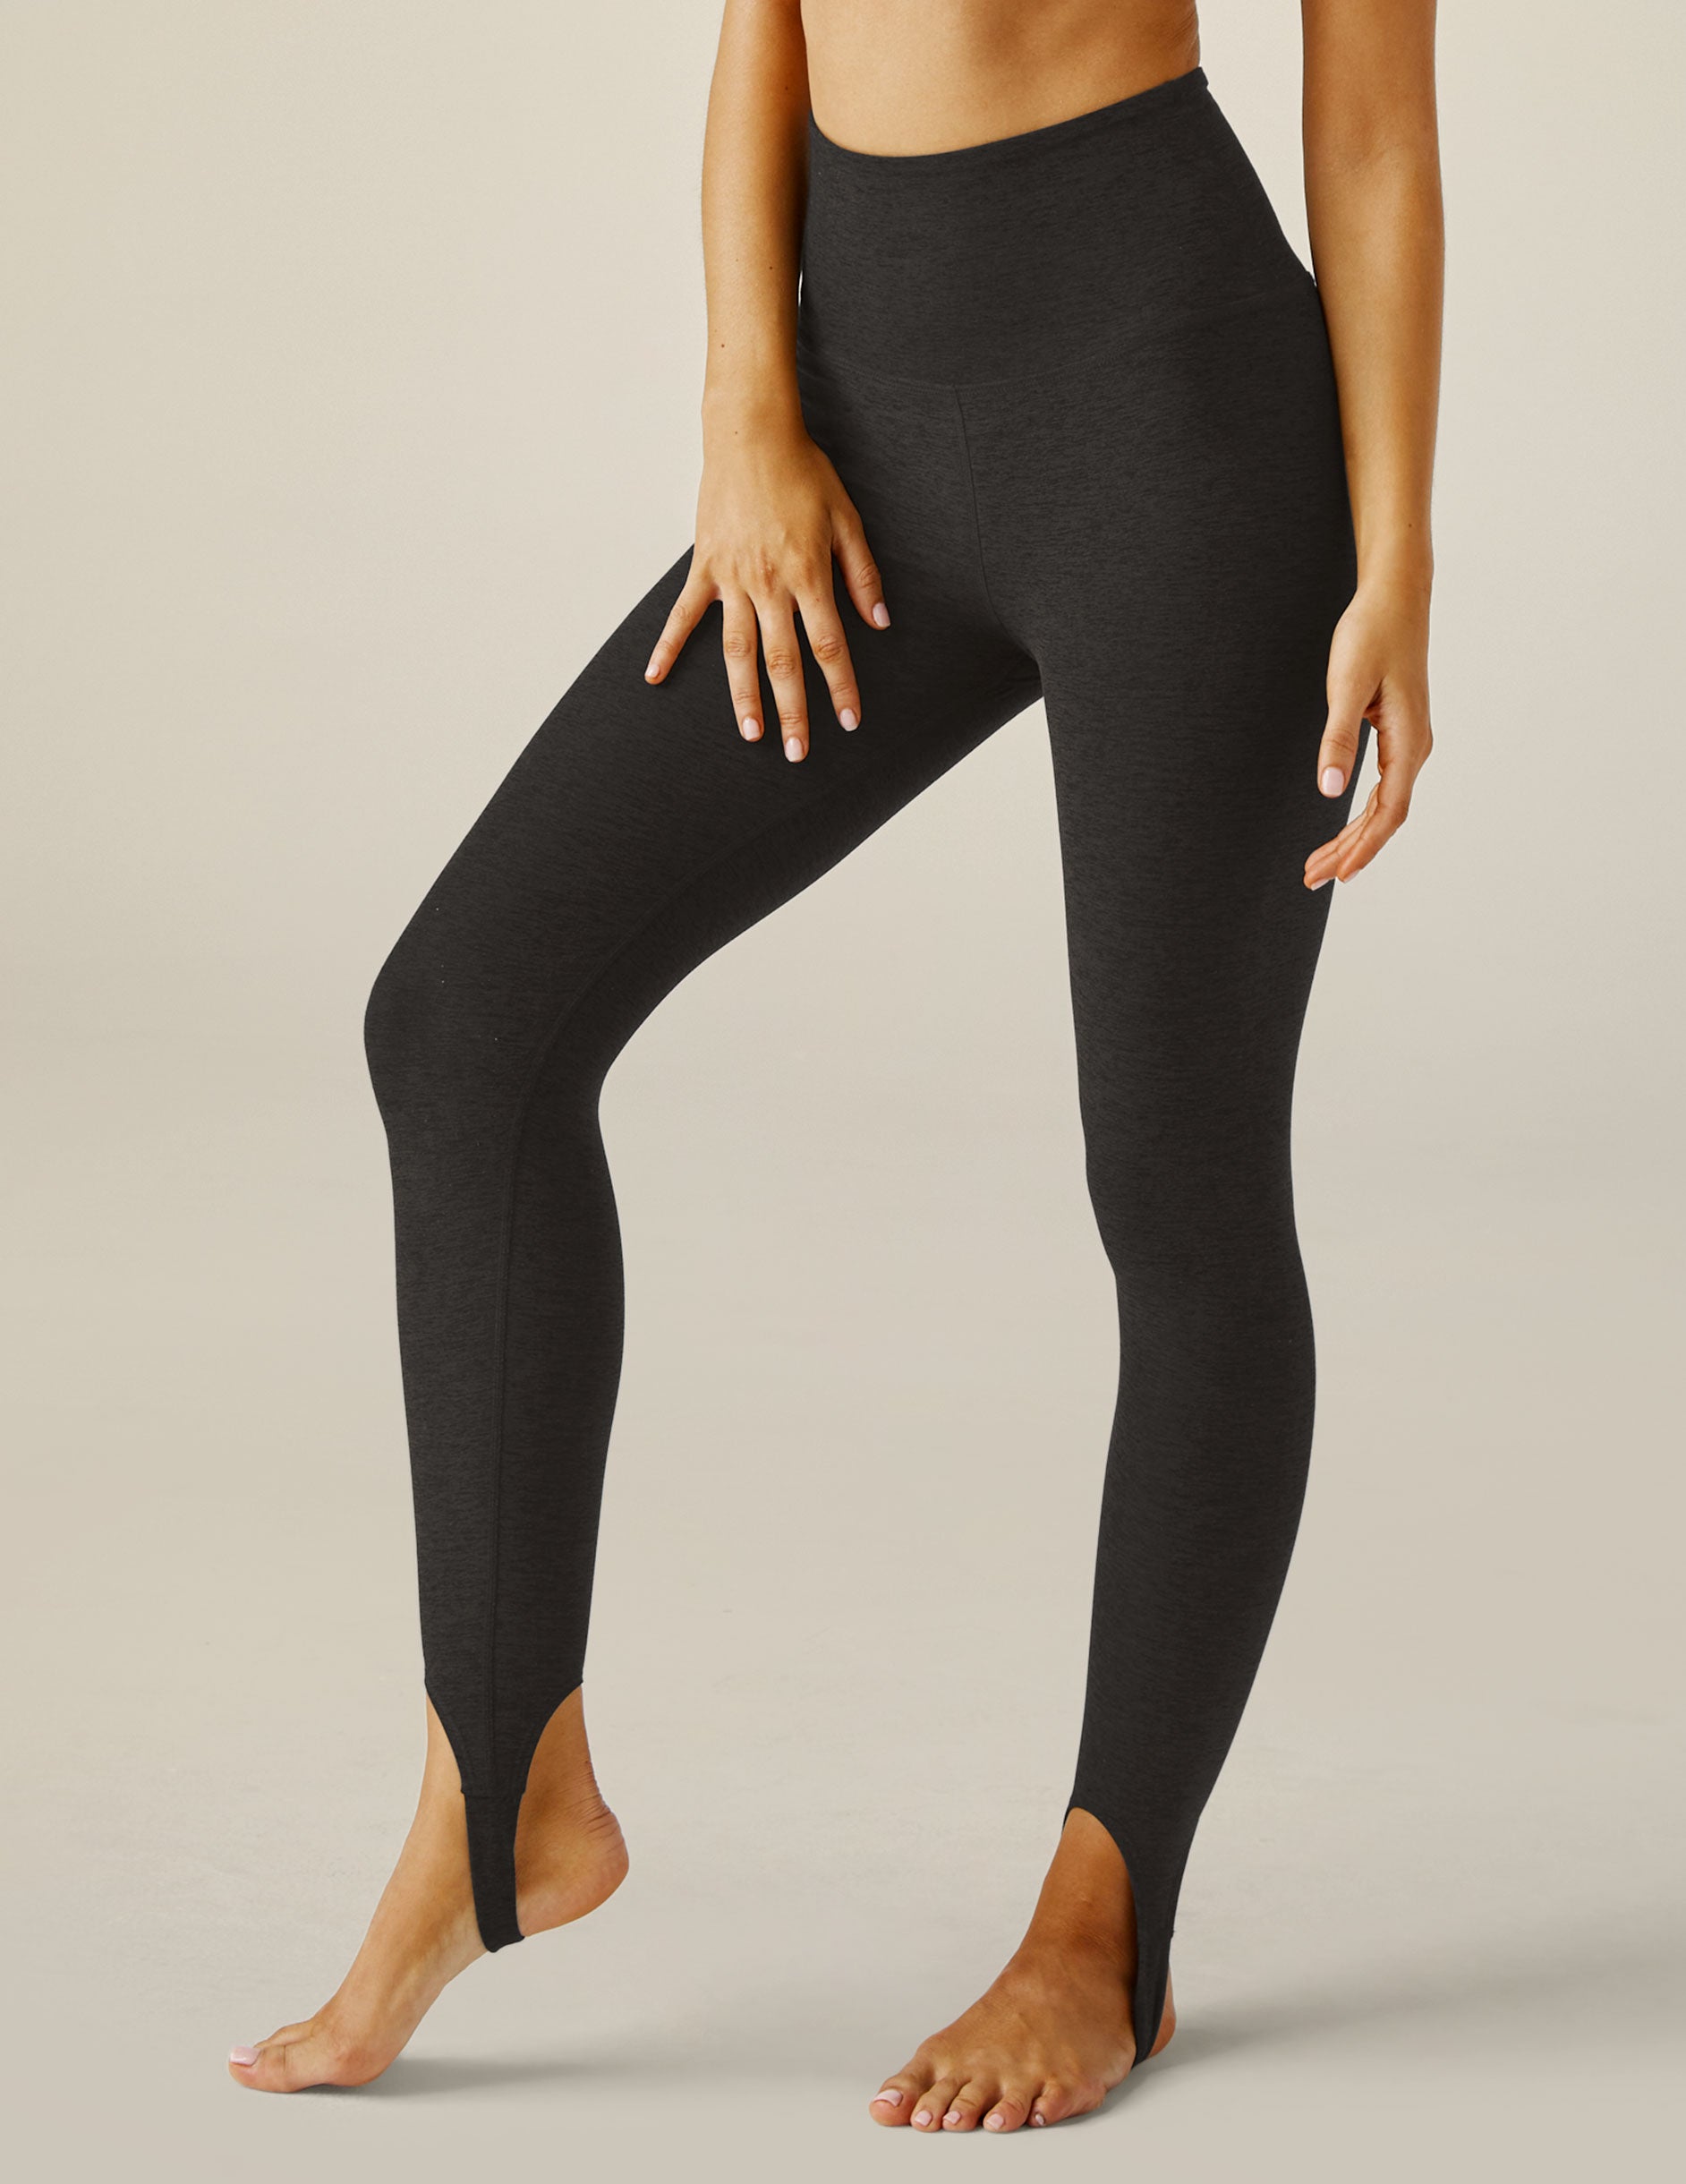 Beyond Yoga - The Beyond Yoga Quilted Stirrup #Legging will make you look  stylish while keeping your feet on the mat - or pair with heels for a night  on the town!